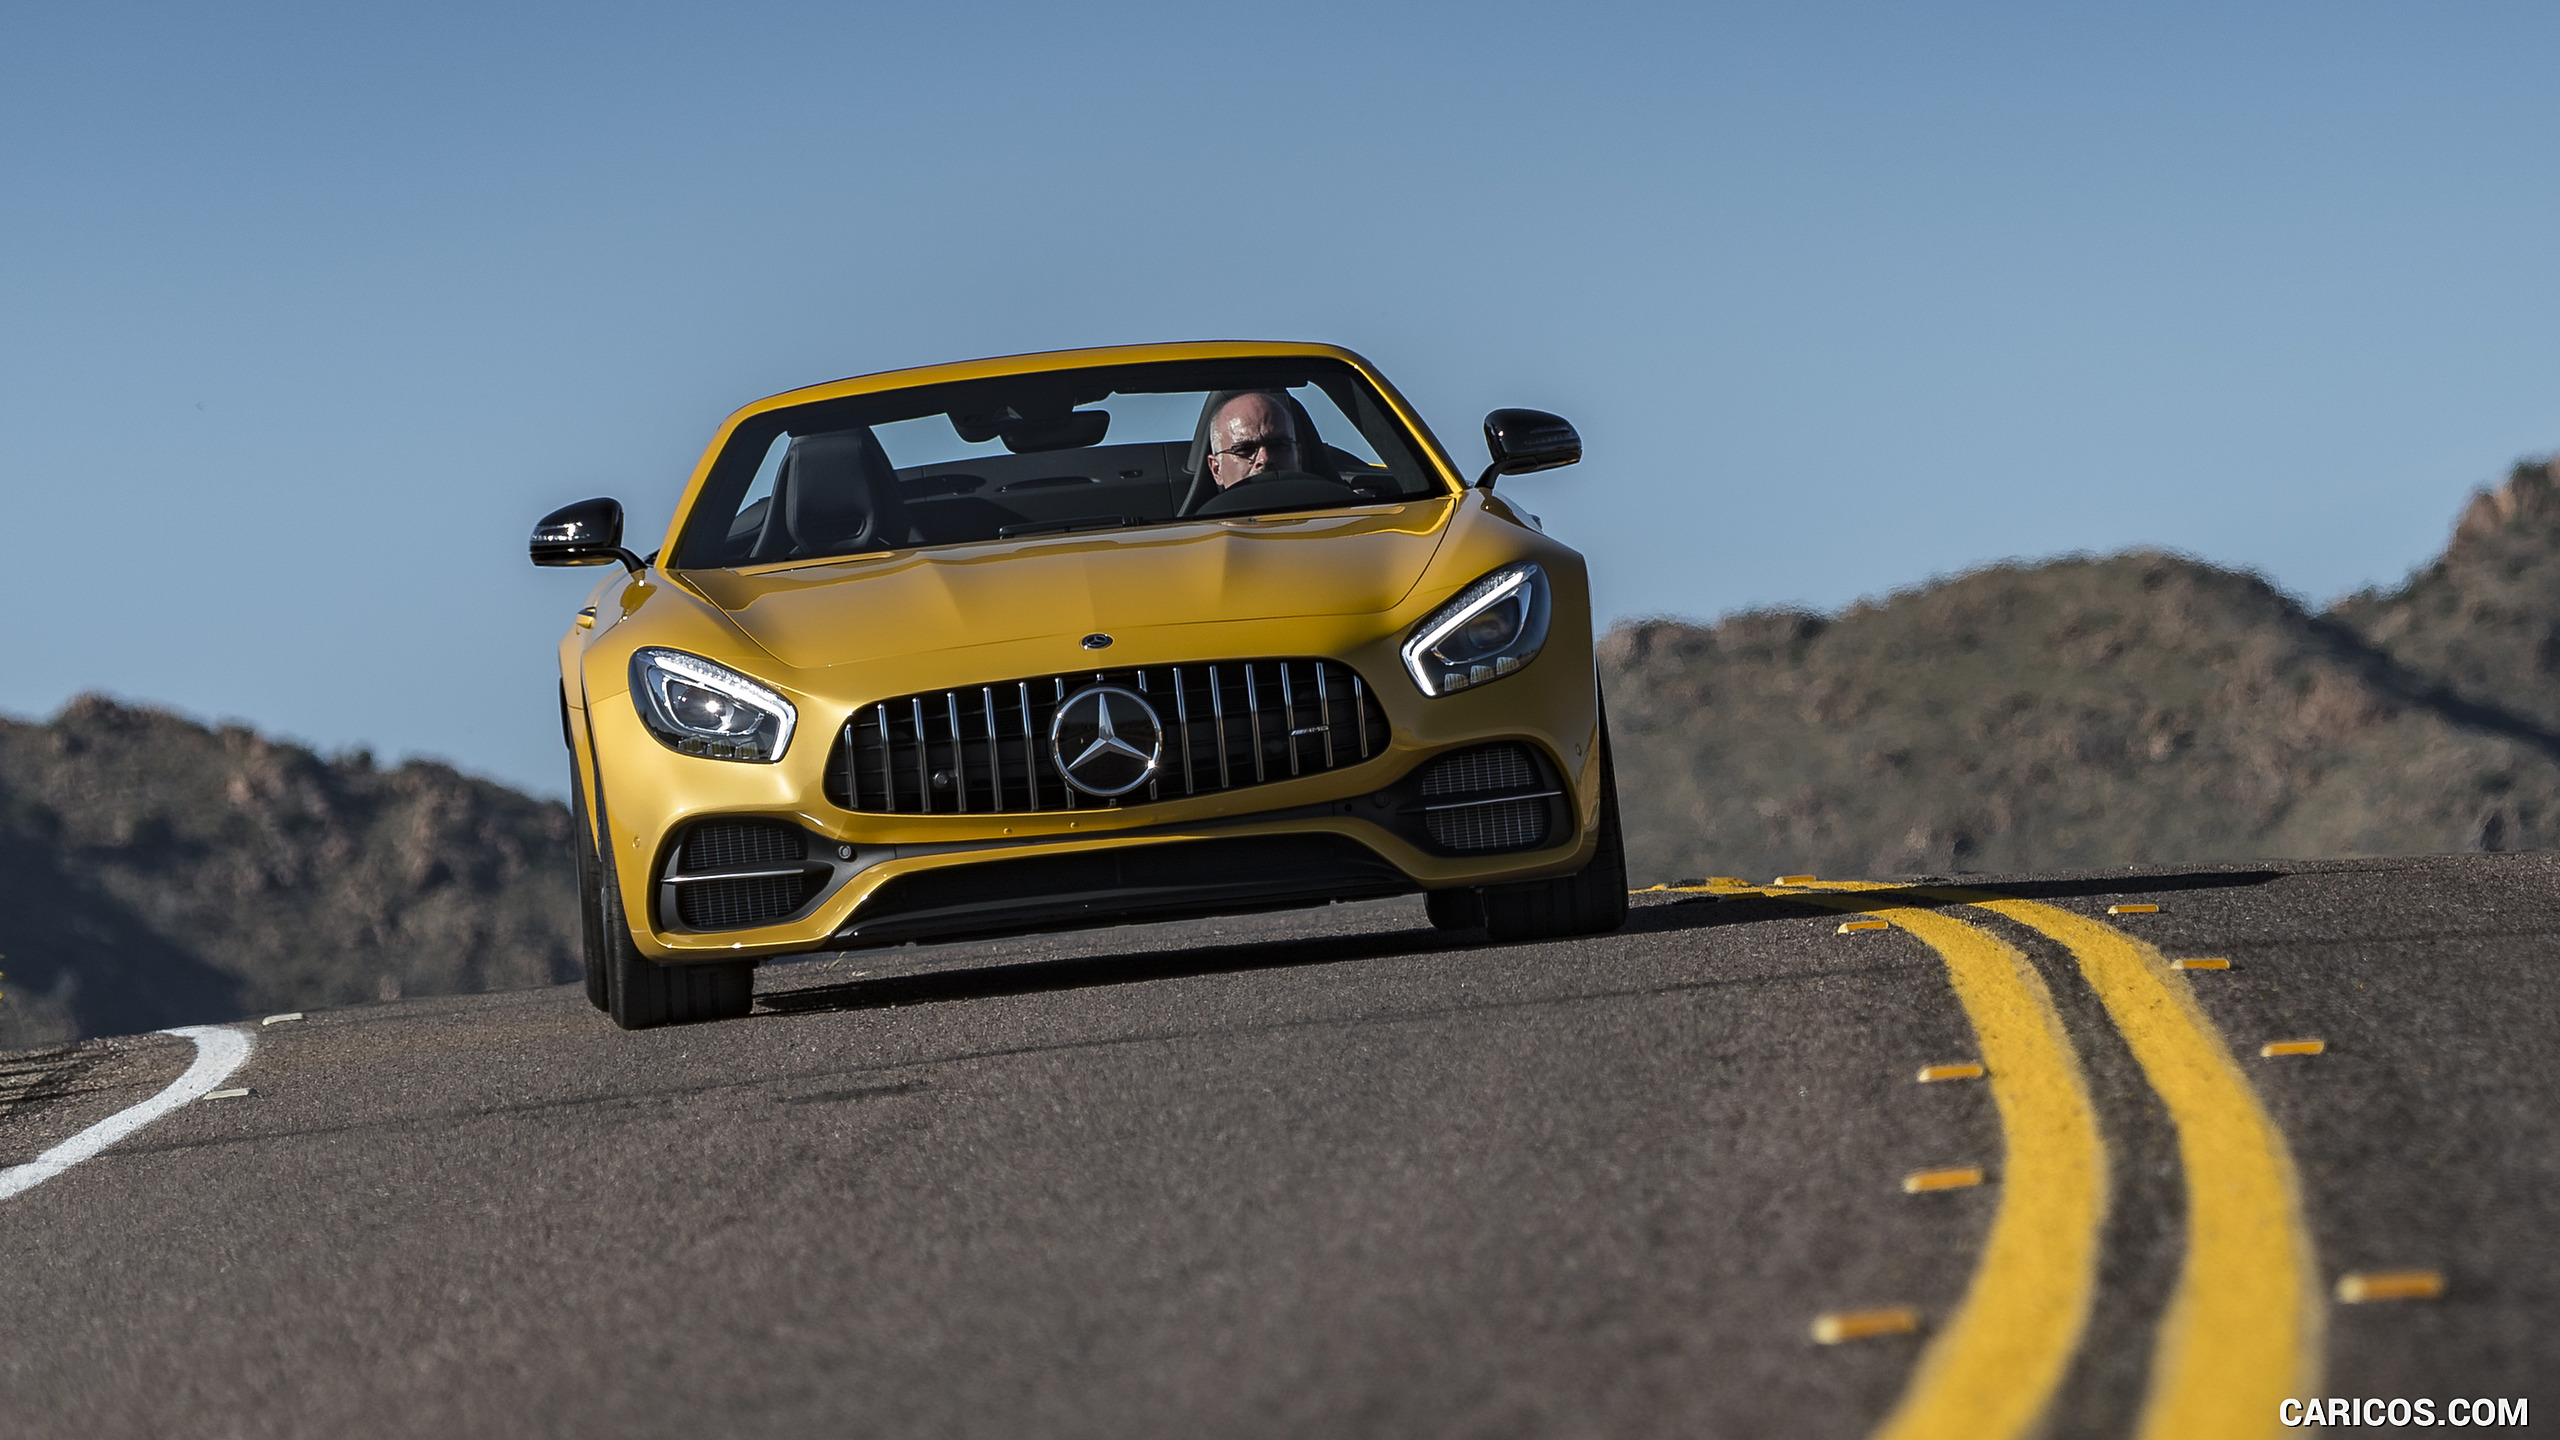 2018 Mercedes-AMG GT C Roadster - Front, #229 of 350